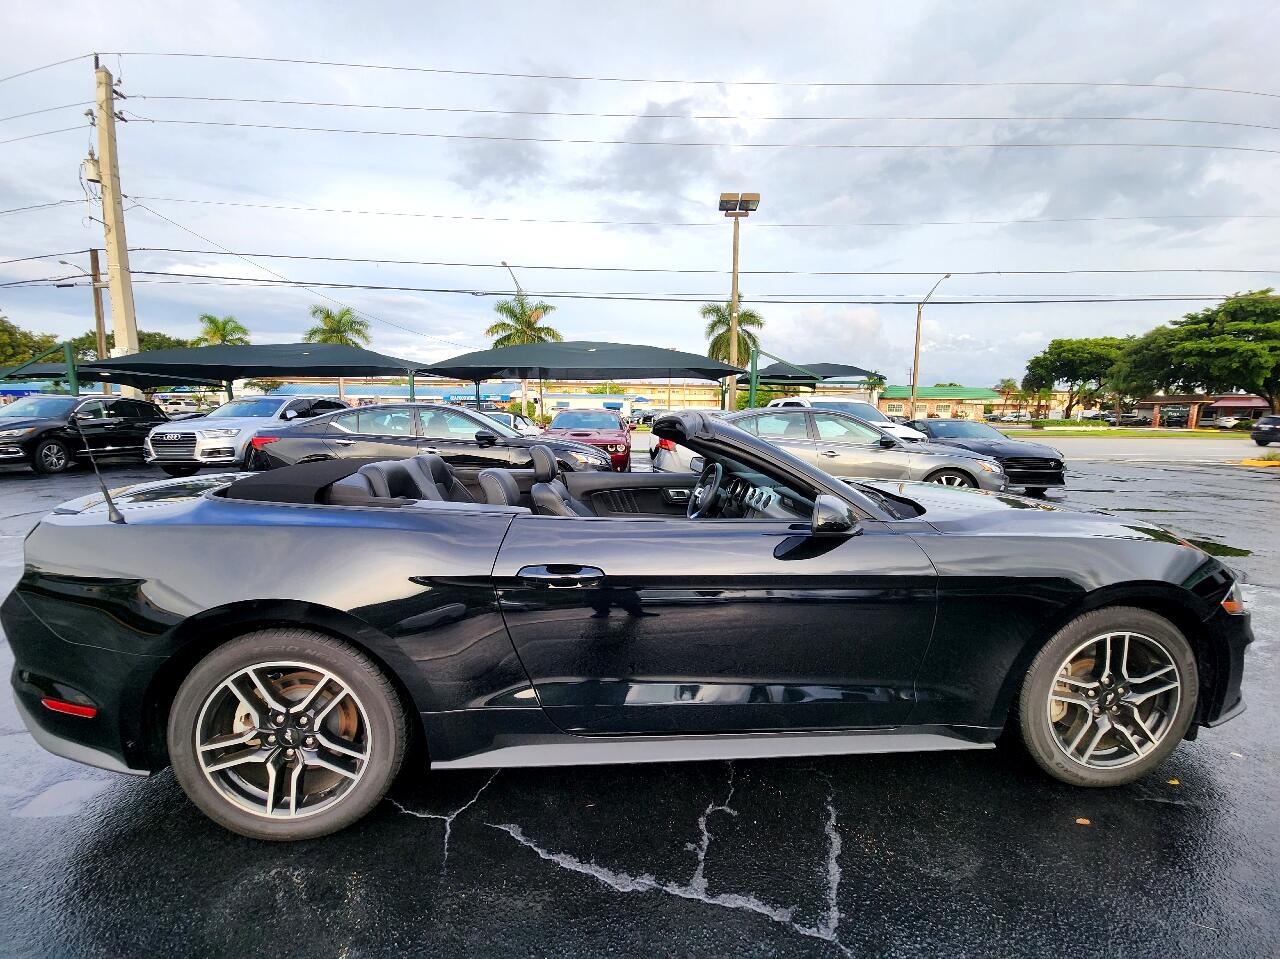 2022 FORD Mustang Convertible - $27,999